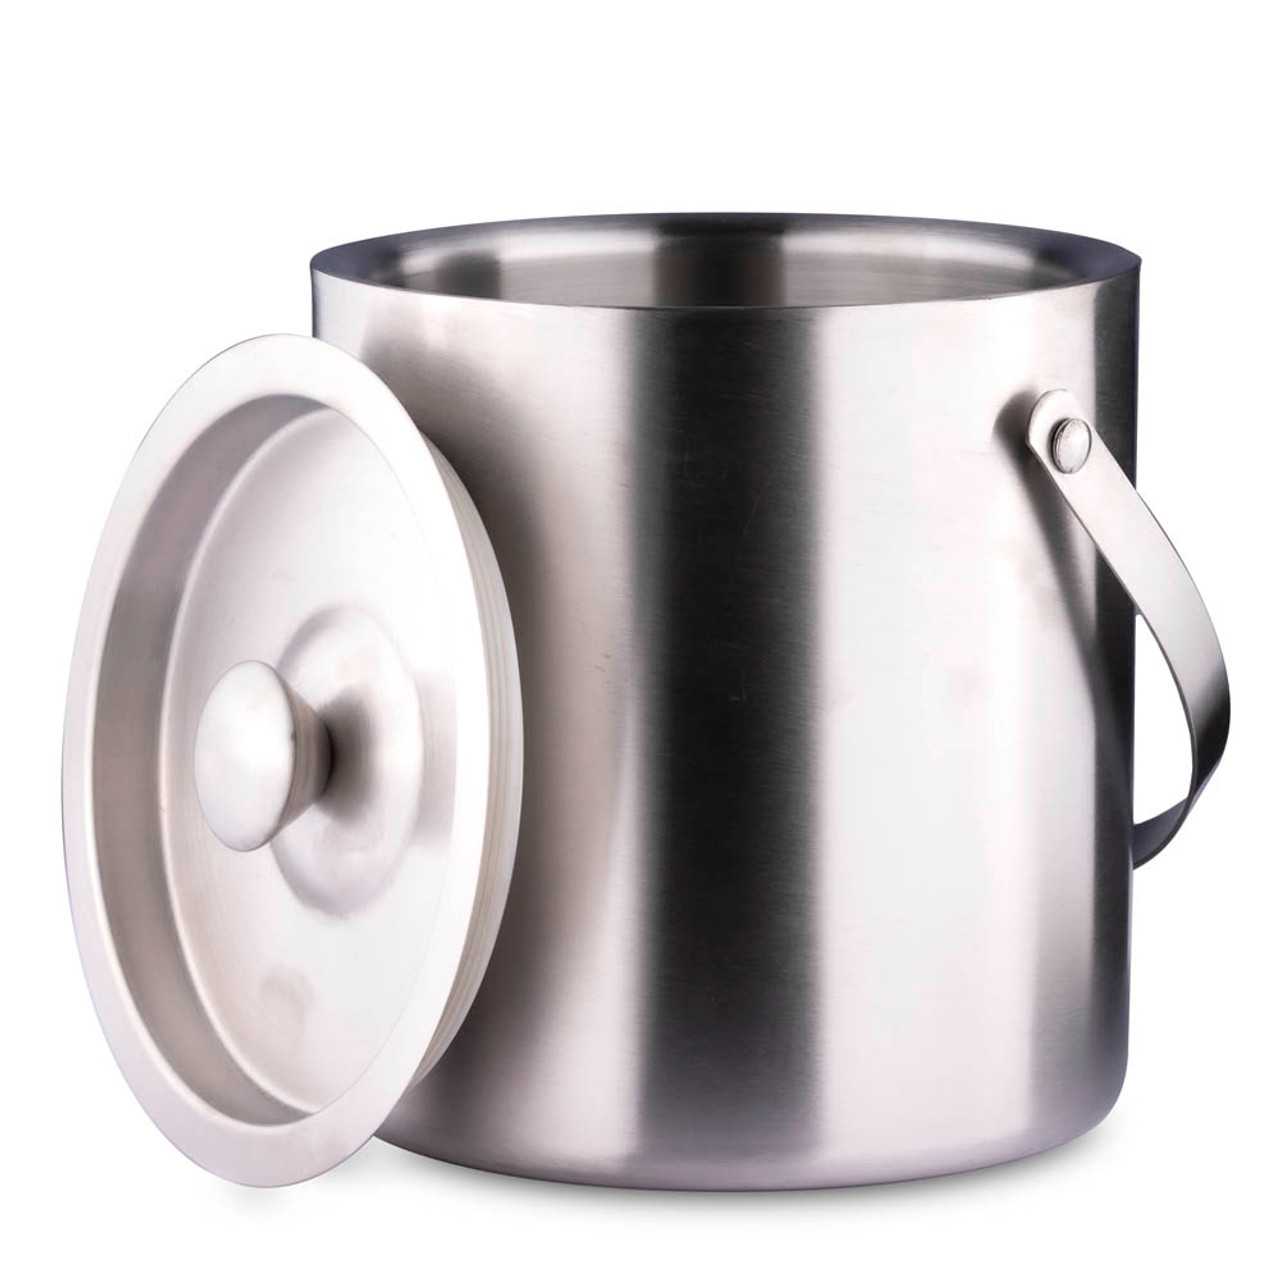 https://cdn11.bigcommerce.com/s-cznxq08r7/images/stencil/1280x1280/products/1292/8885/shi-3qt-behind-the-bar-stainless-steel-double-walled-ice-bucket-2__17026.1590772303.jpg?c=1